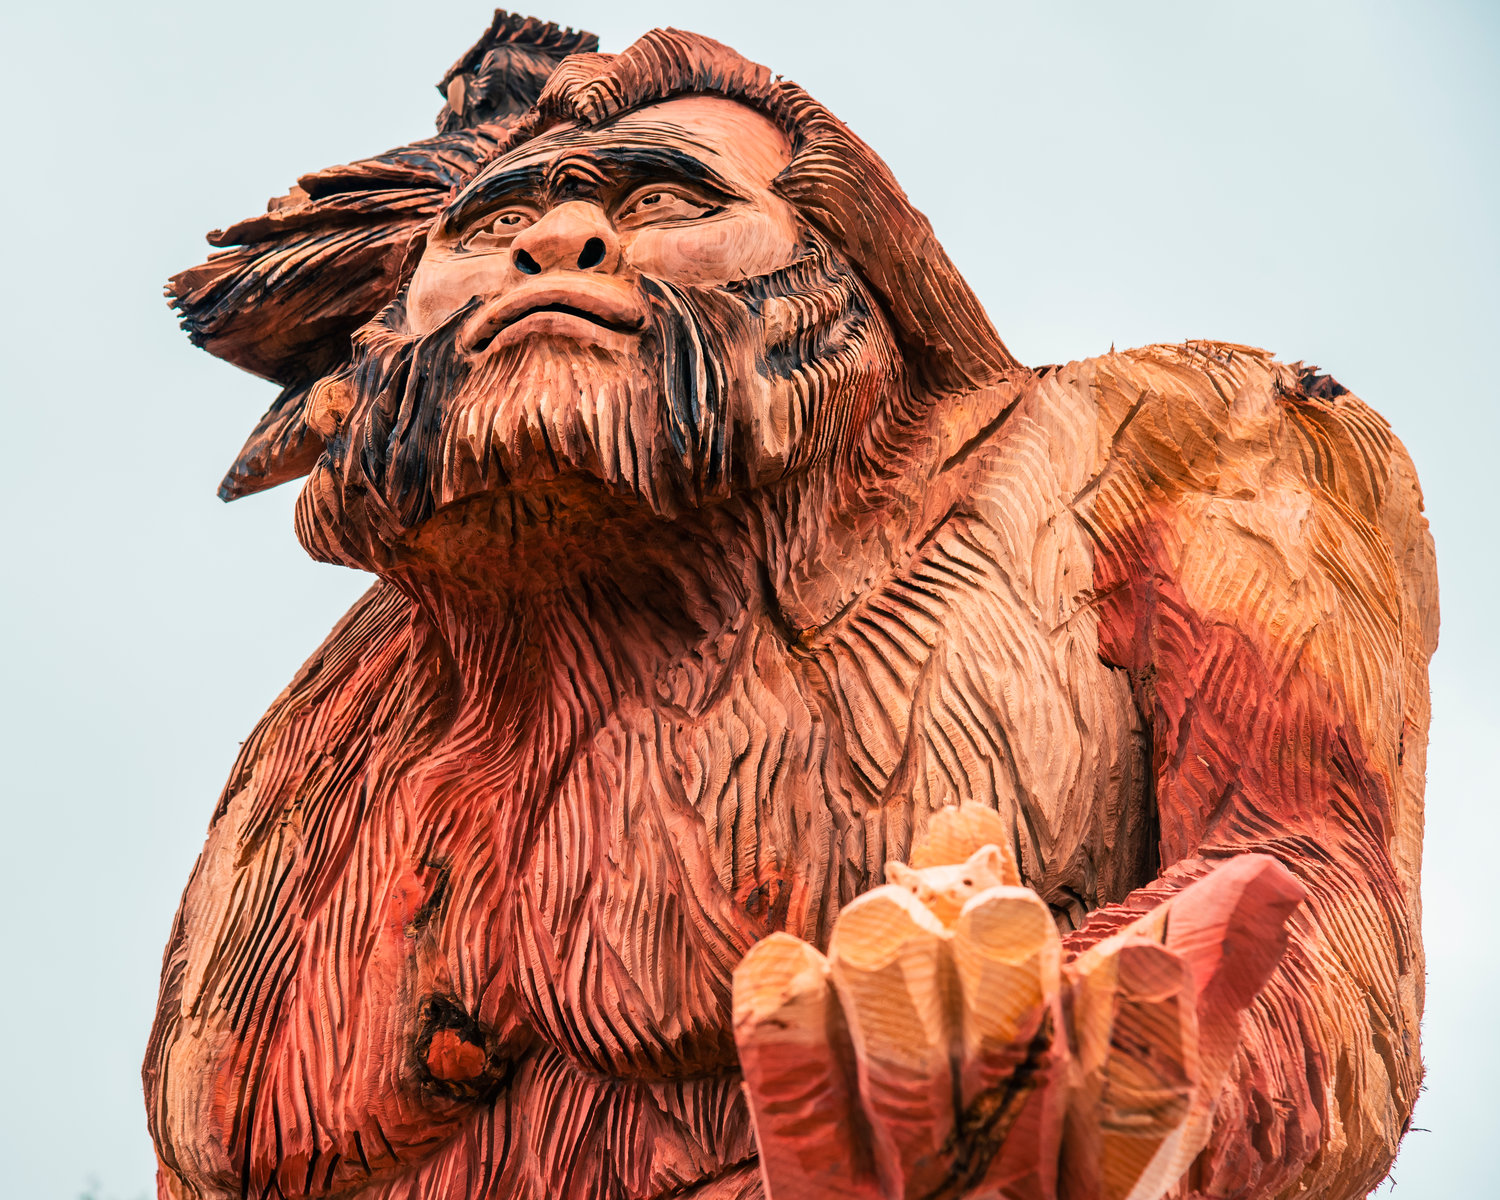 A 17-foot sasquatch carved with chainsaws into a sequoia also features squirrel and owl carvings.